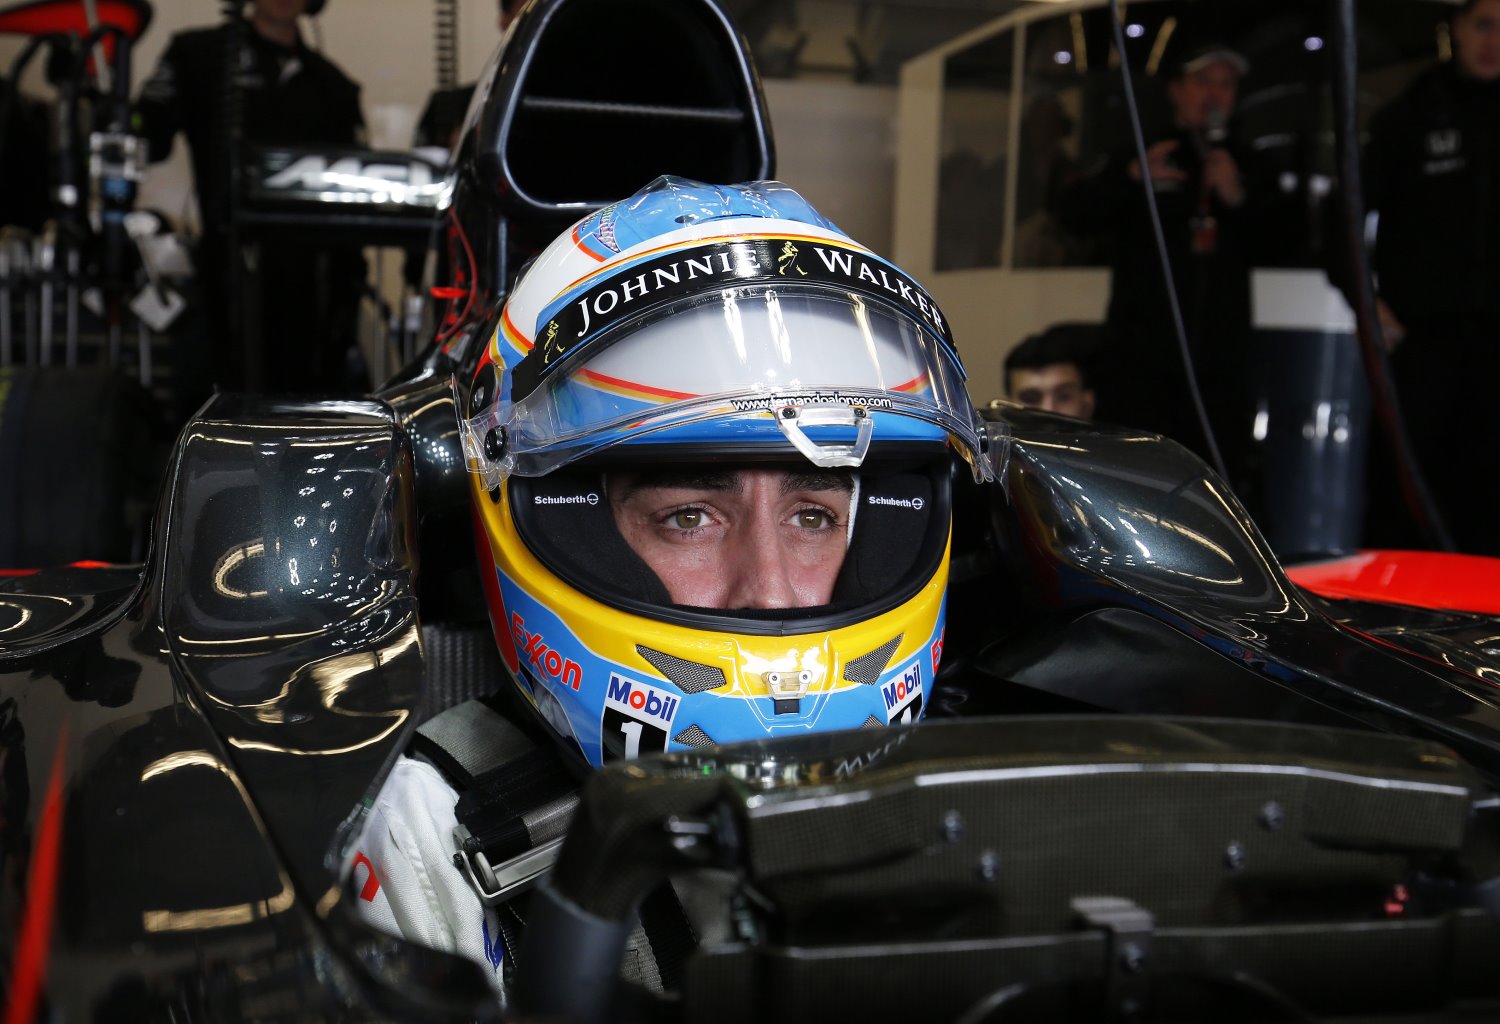 Will Alonso be smiling or crying when he first drives the 2016 McLaren-Honda?